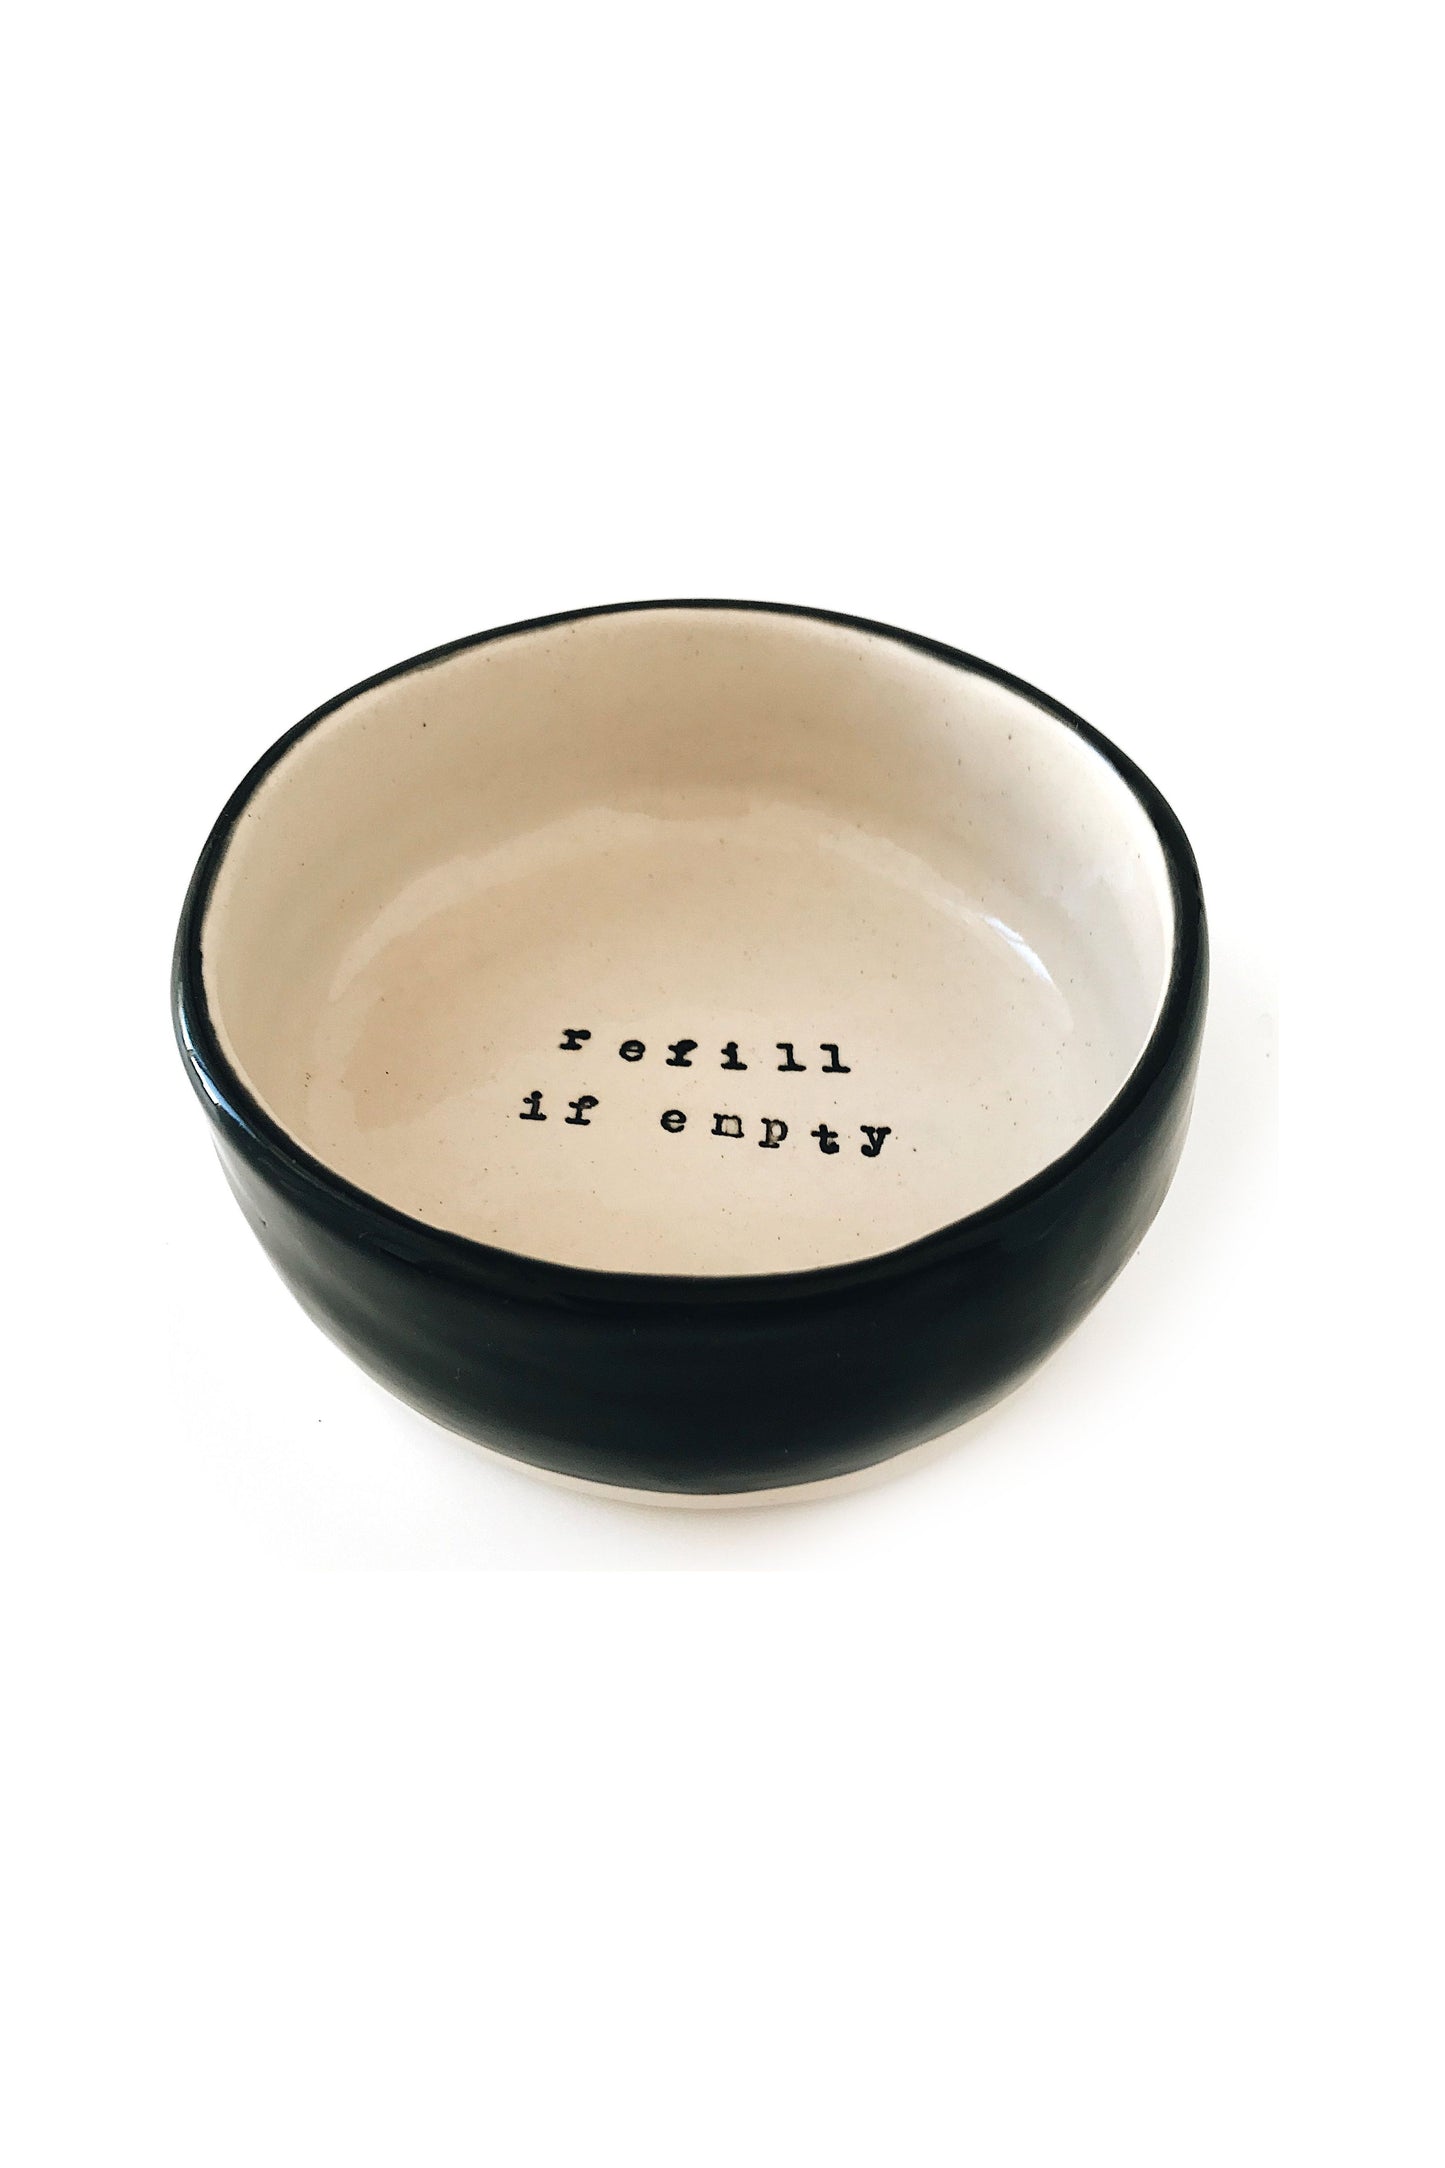 Doggy bowl - refill if empty